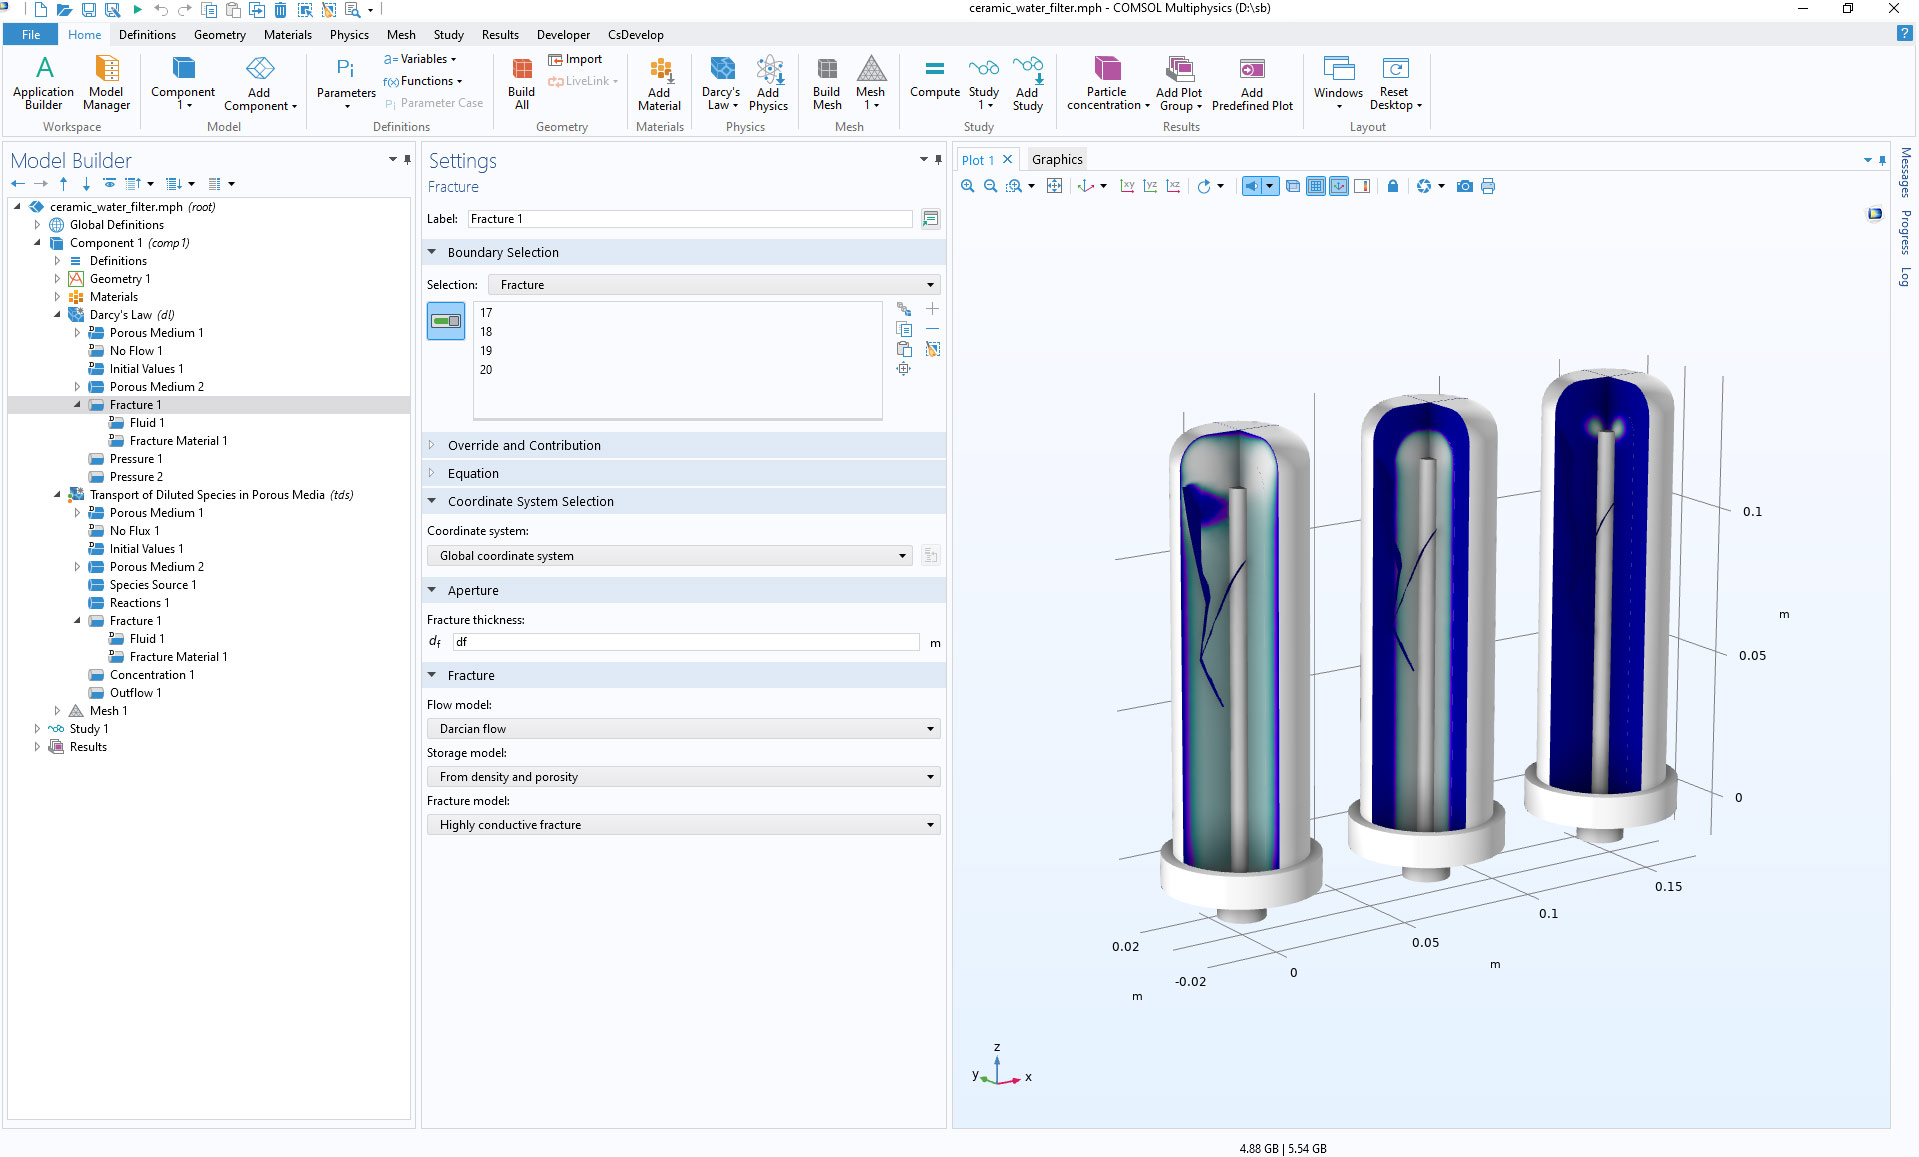 The COMSOL Multiphysics UI showing the Model Builder window with the Fracture node selected, the corresponding Settings window, and the Graphics window with the ceramic water filter model.